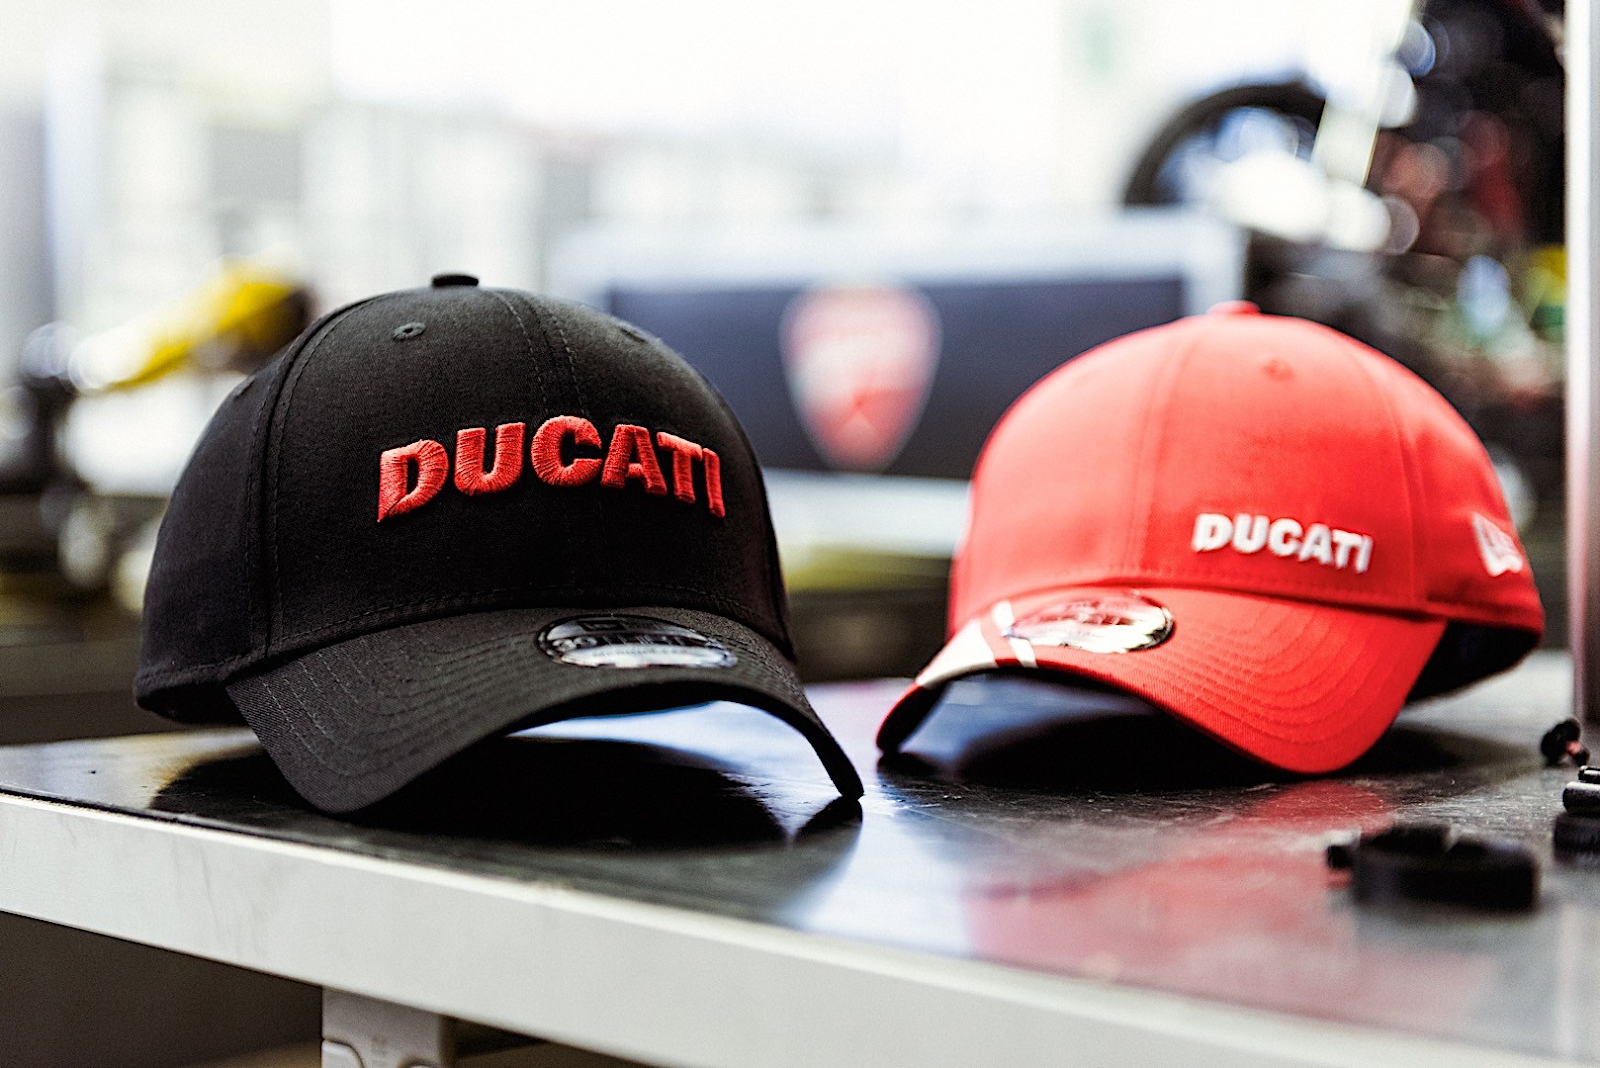 Black and red Ducati brand cap on the table